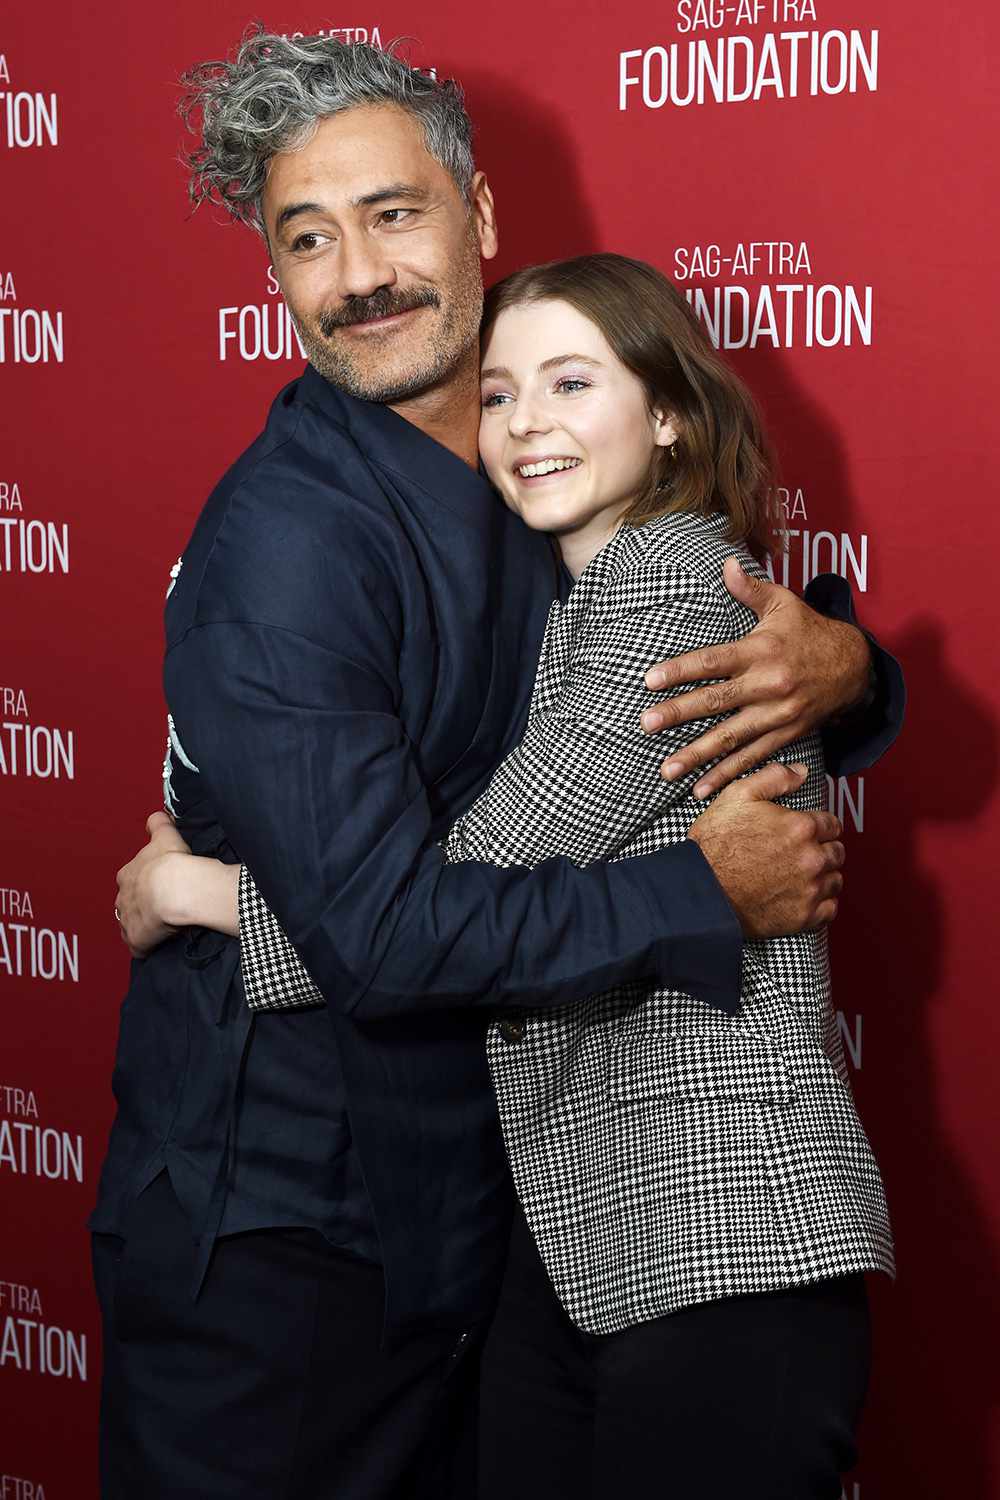 Taika Waititi (L) and actress Thomasin McKenzie attend the SAG-AFTRA Foundation Conversations with "JoJo Rabbit" at the SAG-AFTRA Foundation Screening Room on January 08, 2020